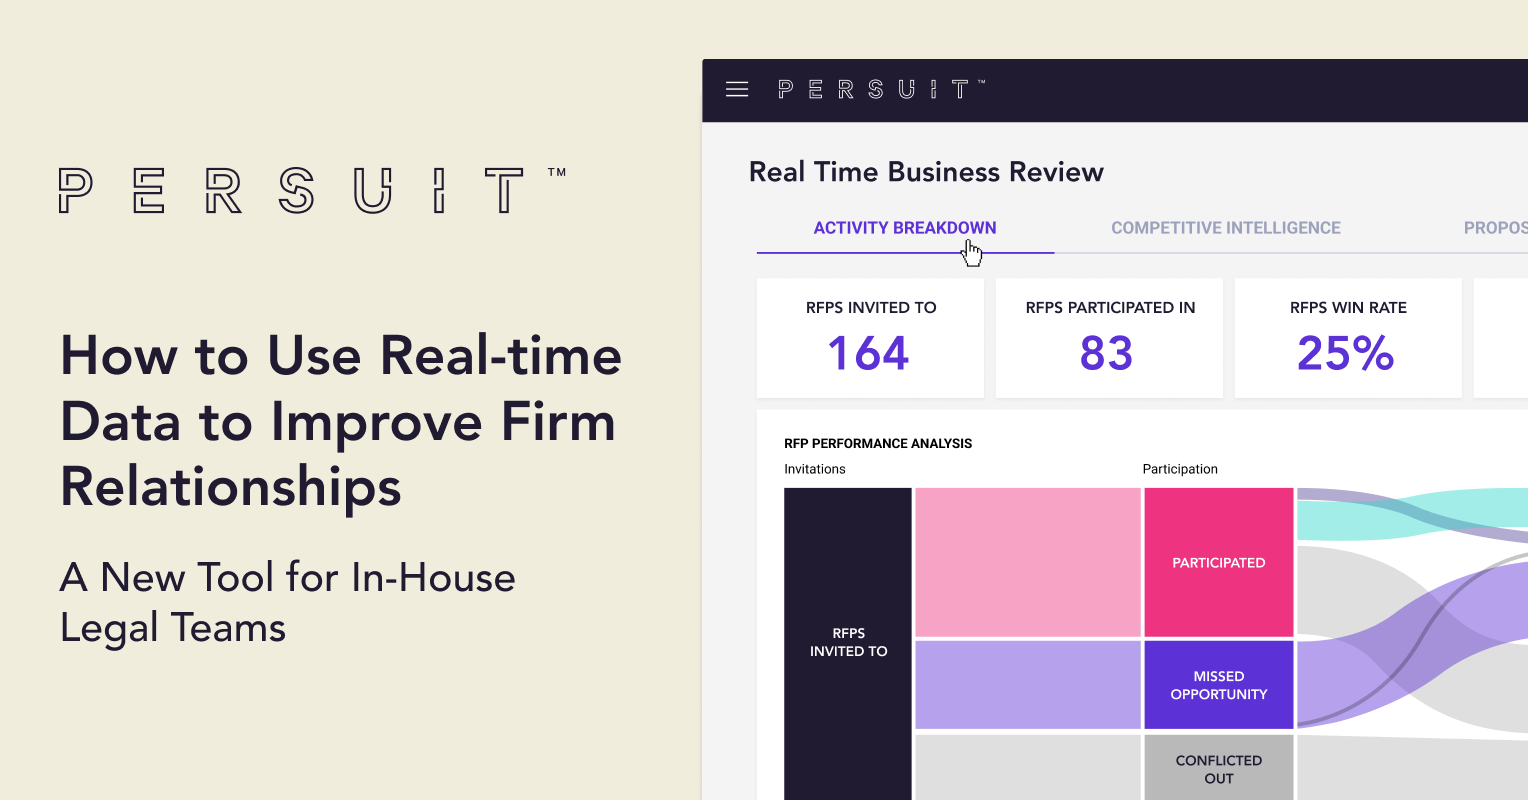 Real-time Business Reviews: How to Use Real-time Data to Improve Firm Relationships